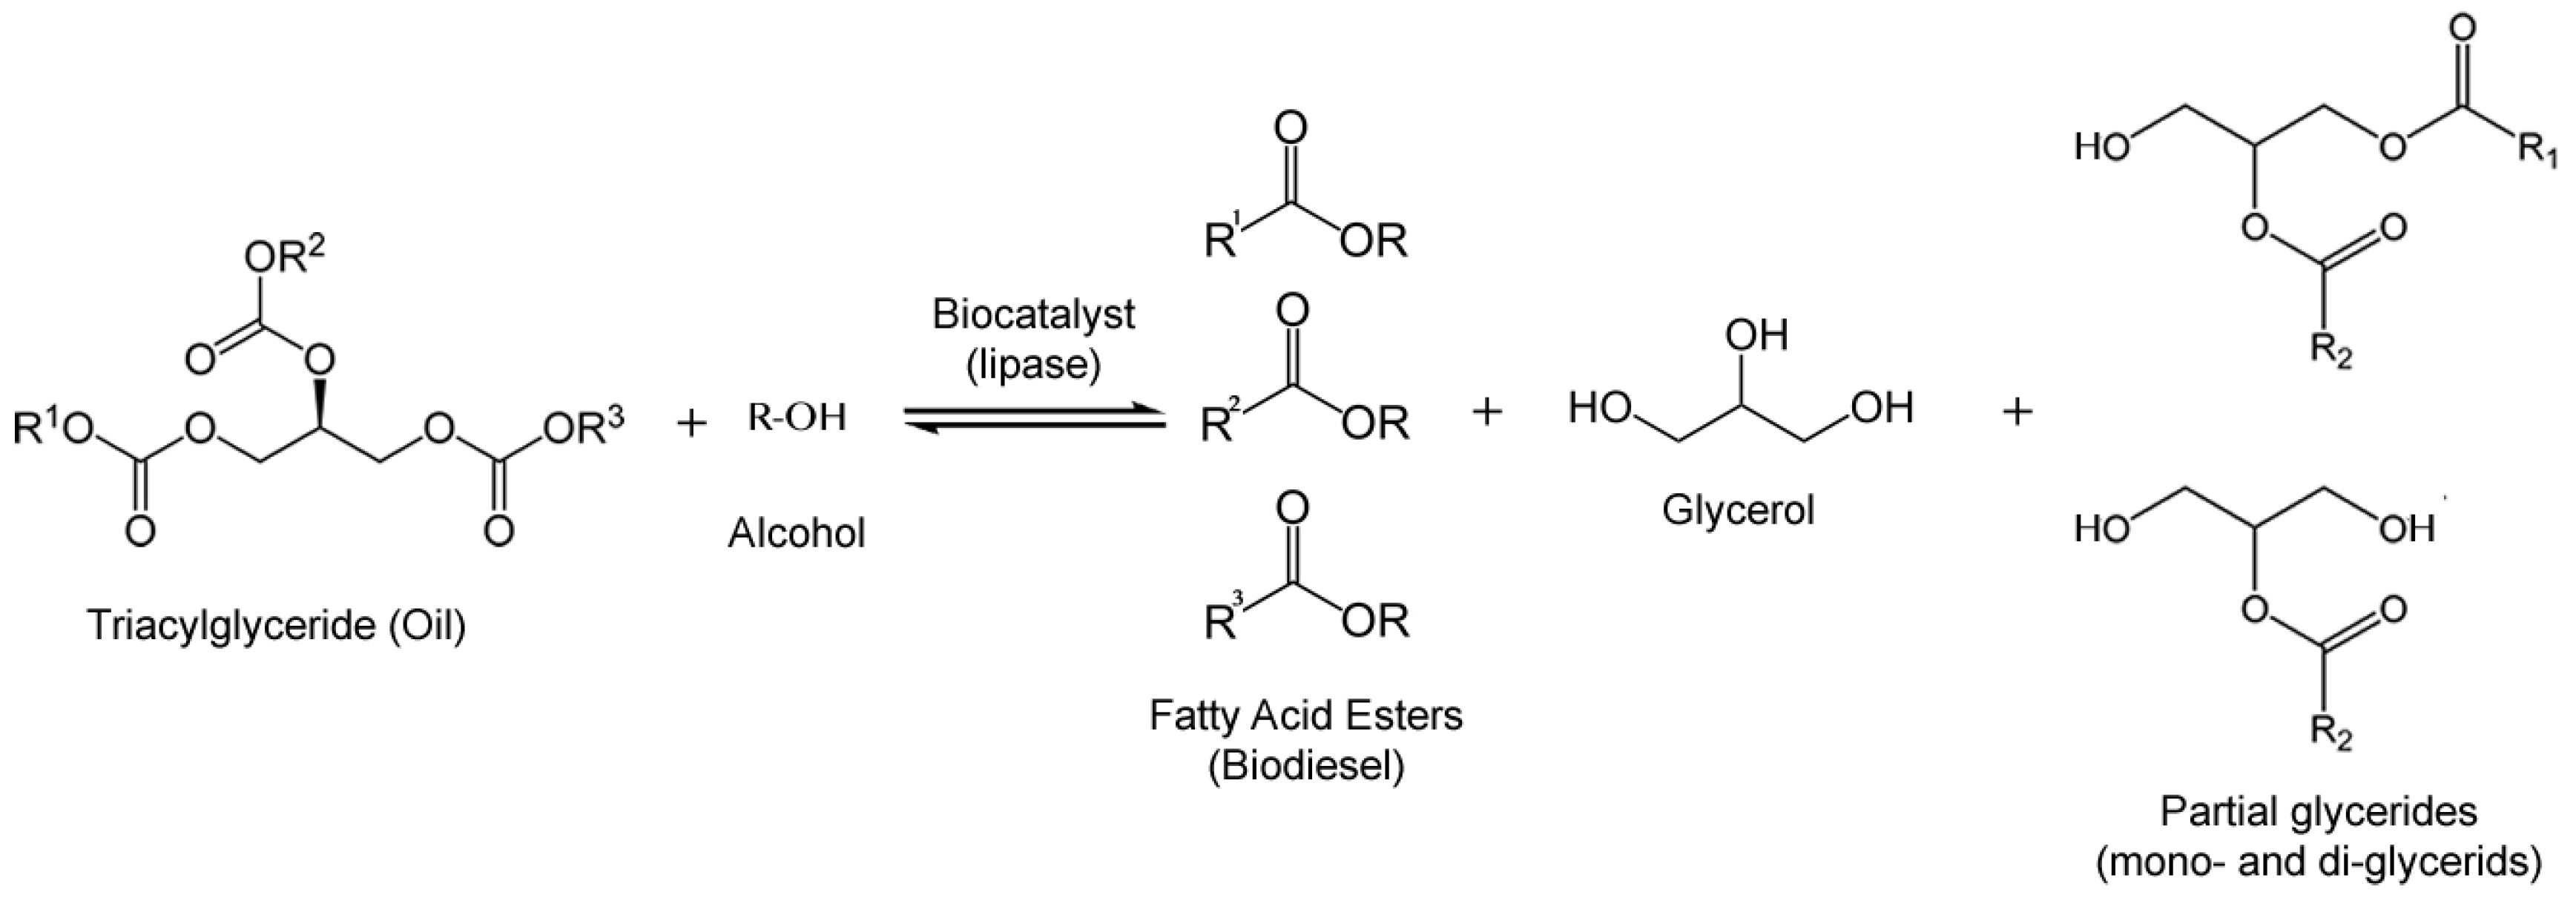 Reactions of butanols with hydrbromic acid